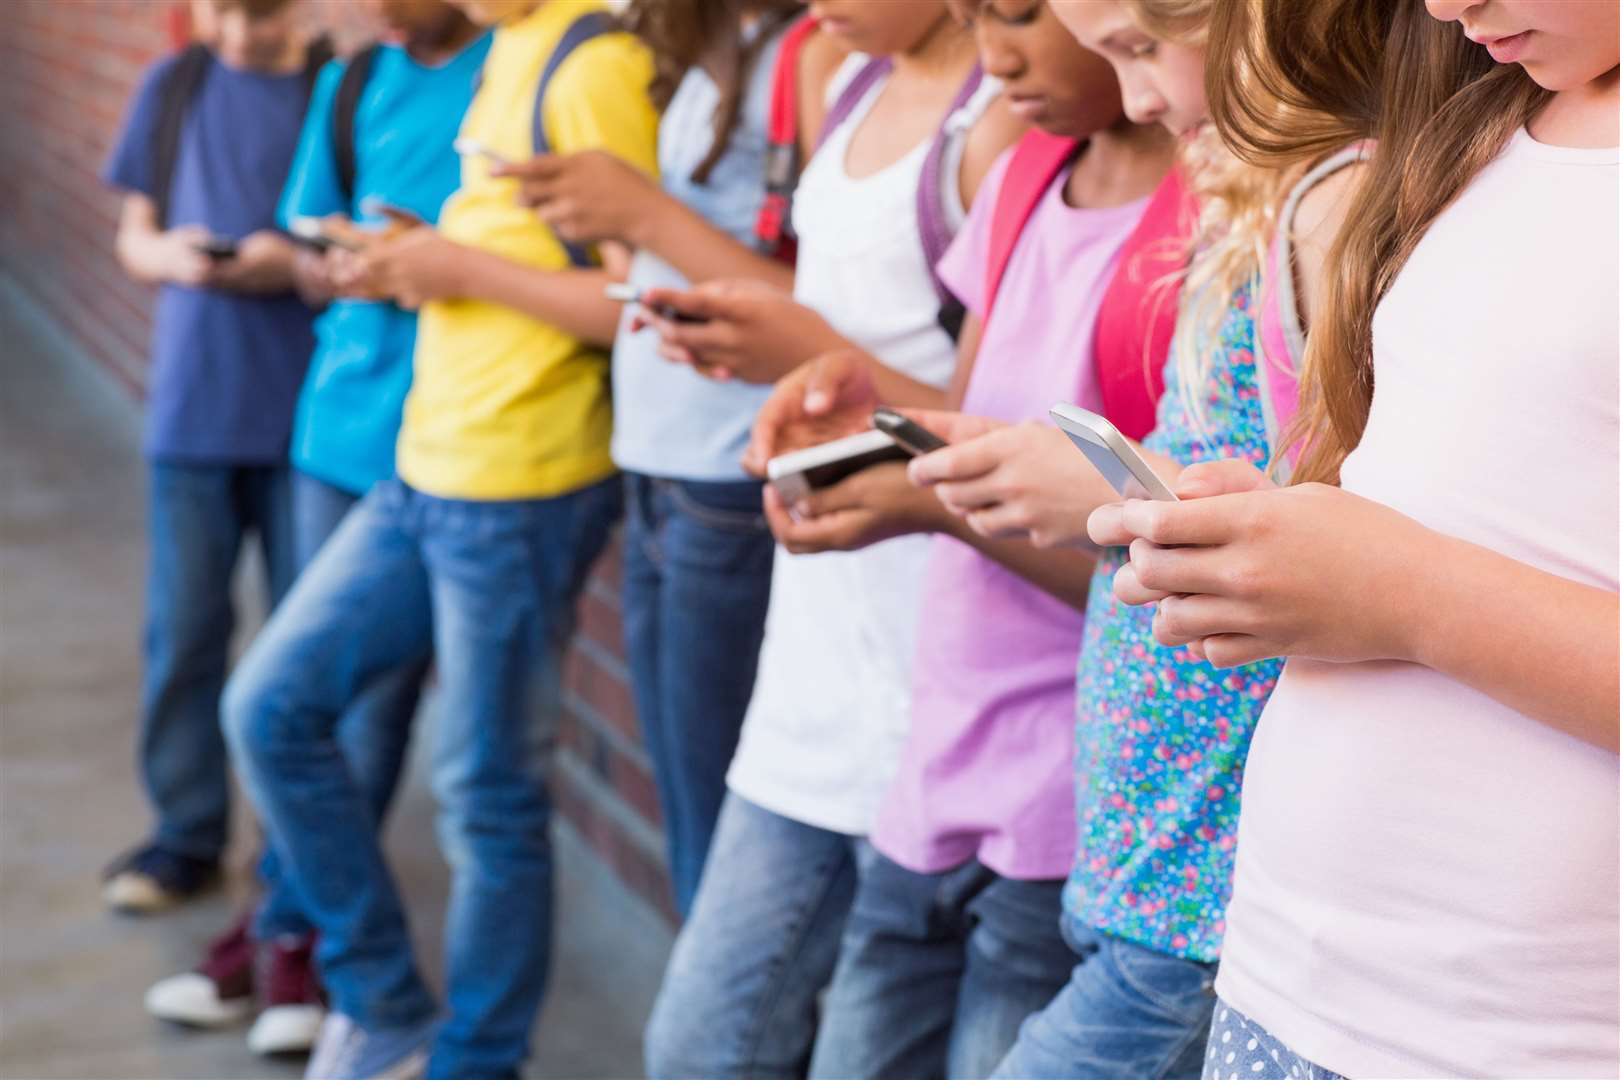 Have we given into smartphones too early? Image: iStock.